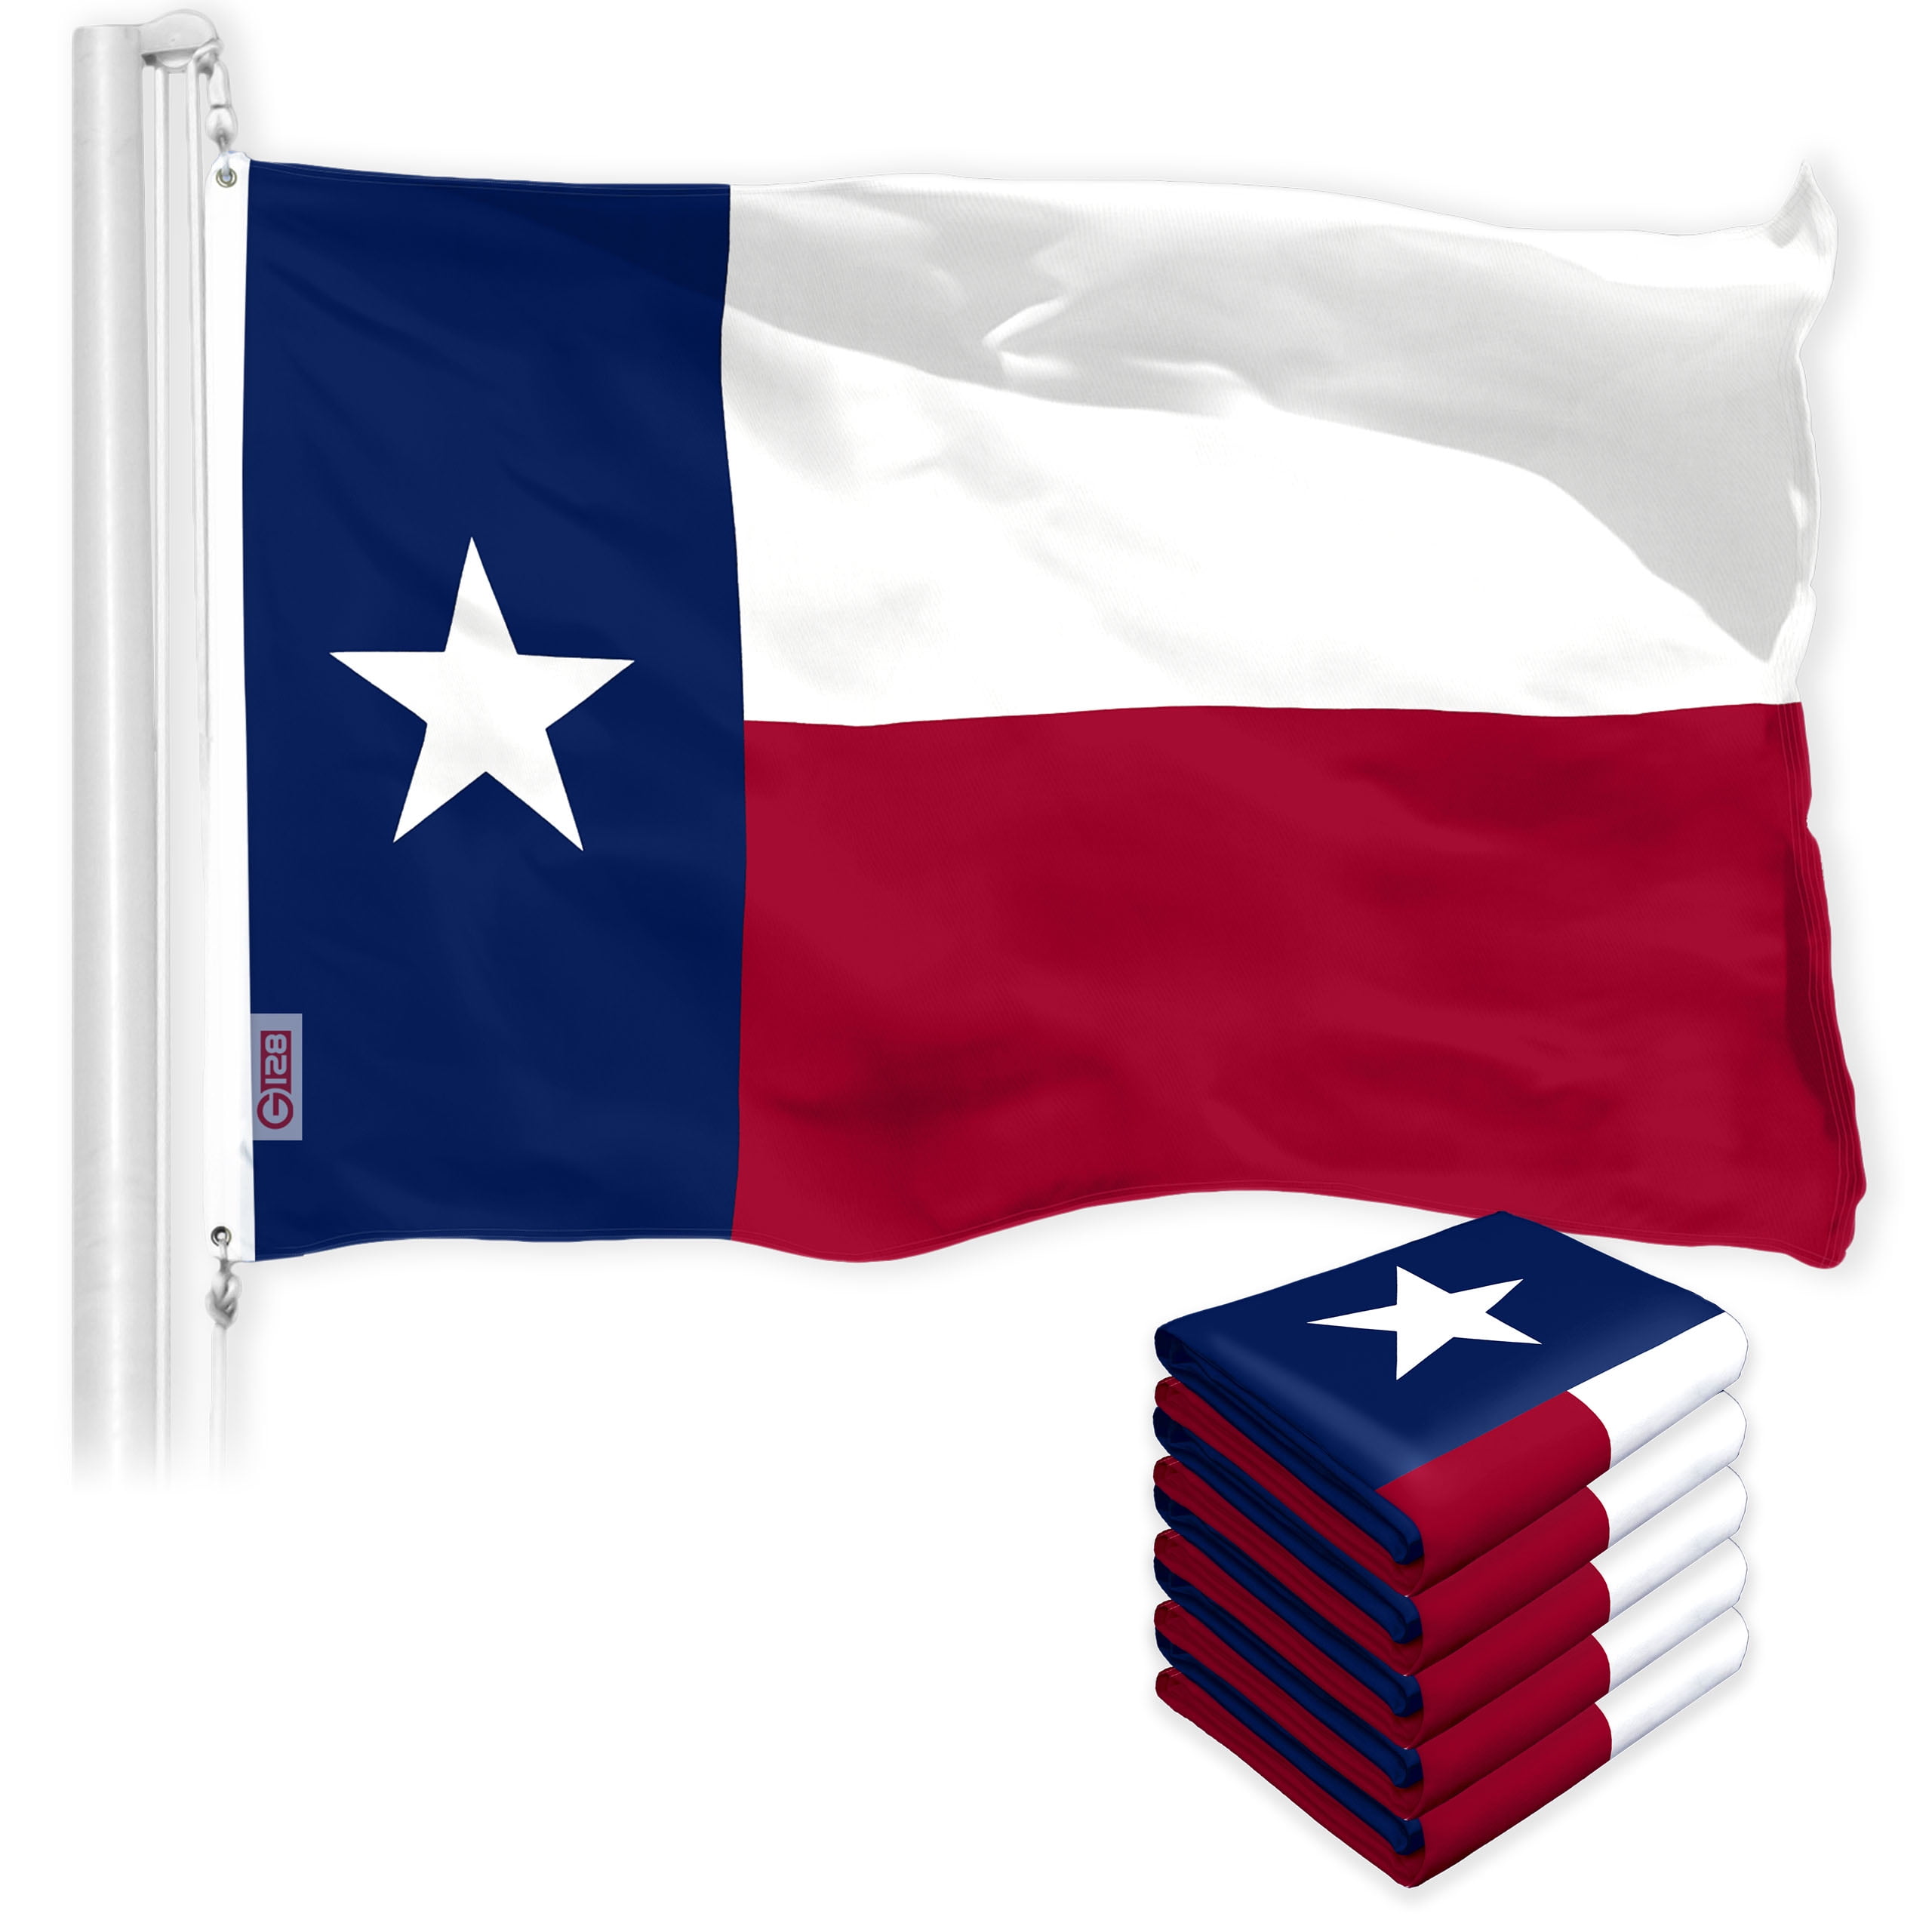 Texas TX State Flag 3x5 FT Printed 150D Polyester The Lone Star State By G128 